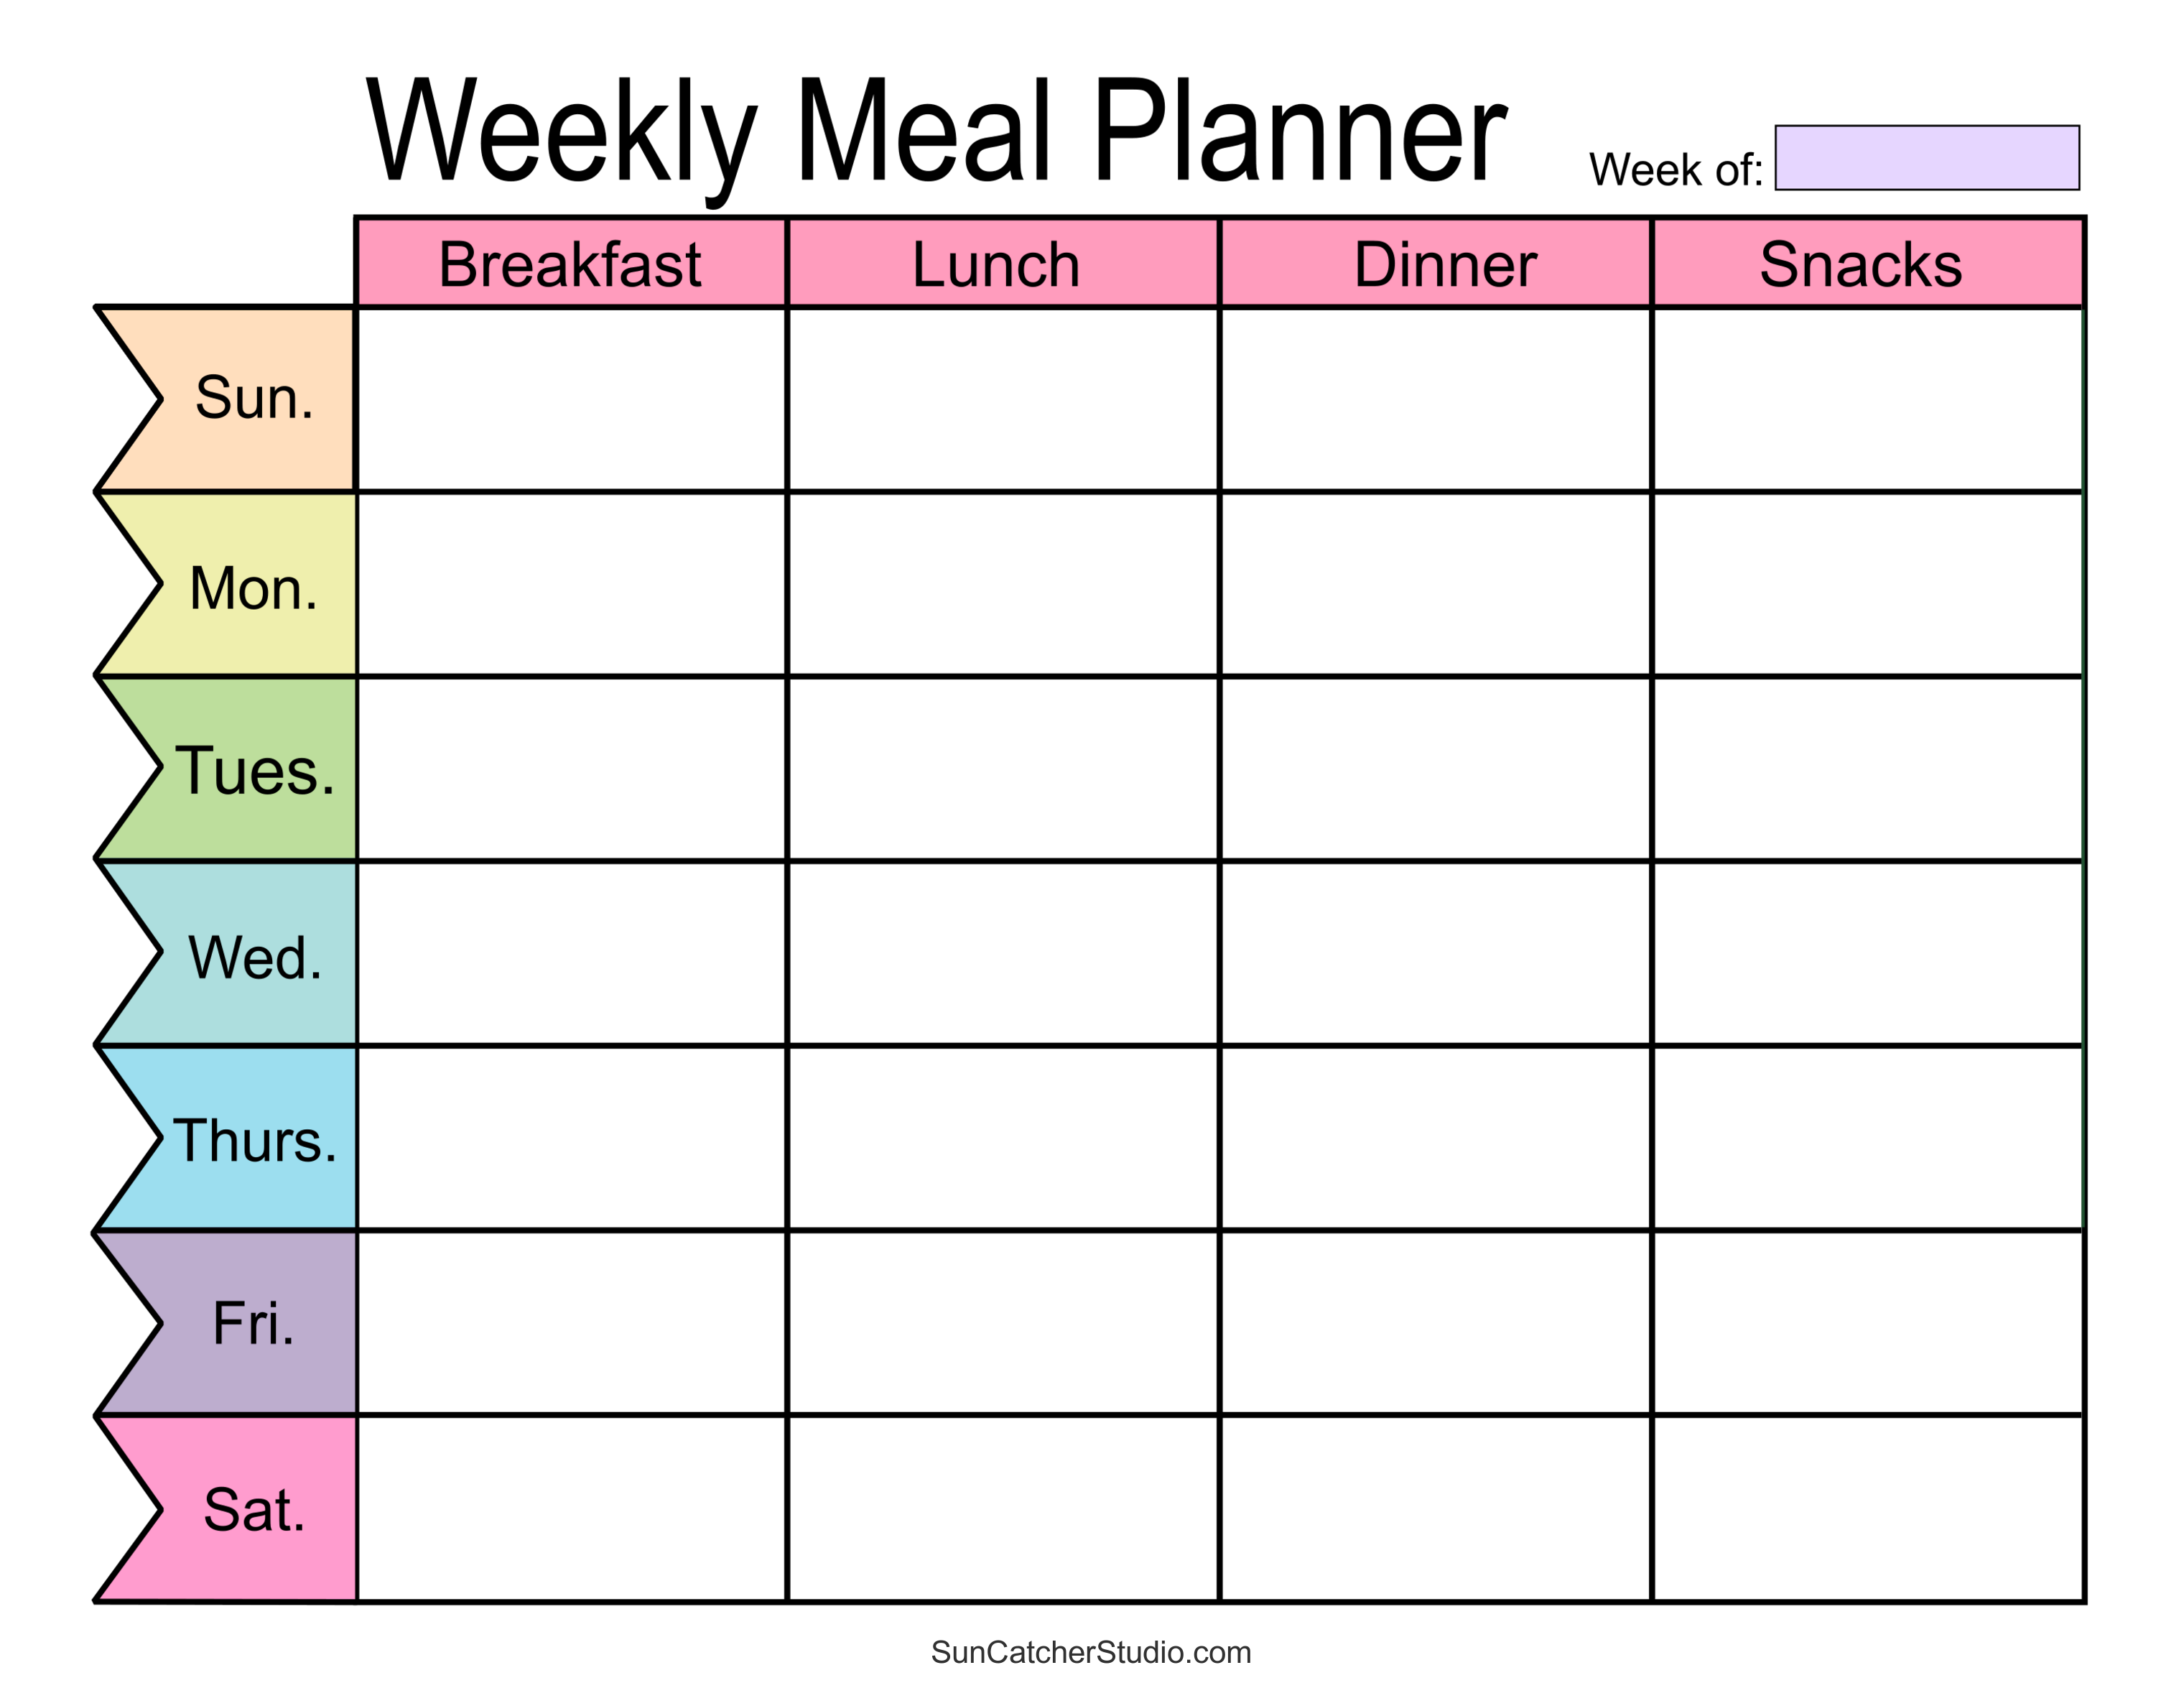 meal-planners-printable-weekly-menu-templates-pdf-diy-projects